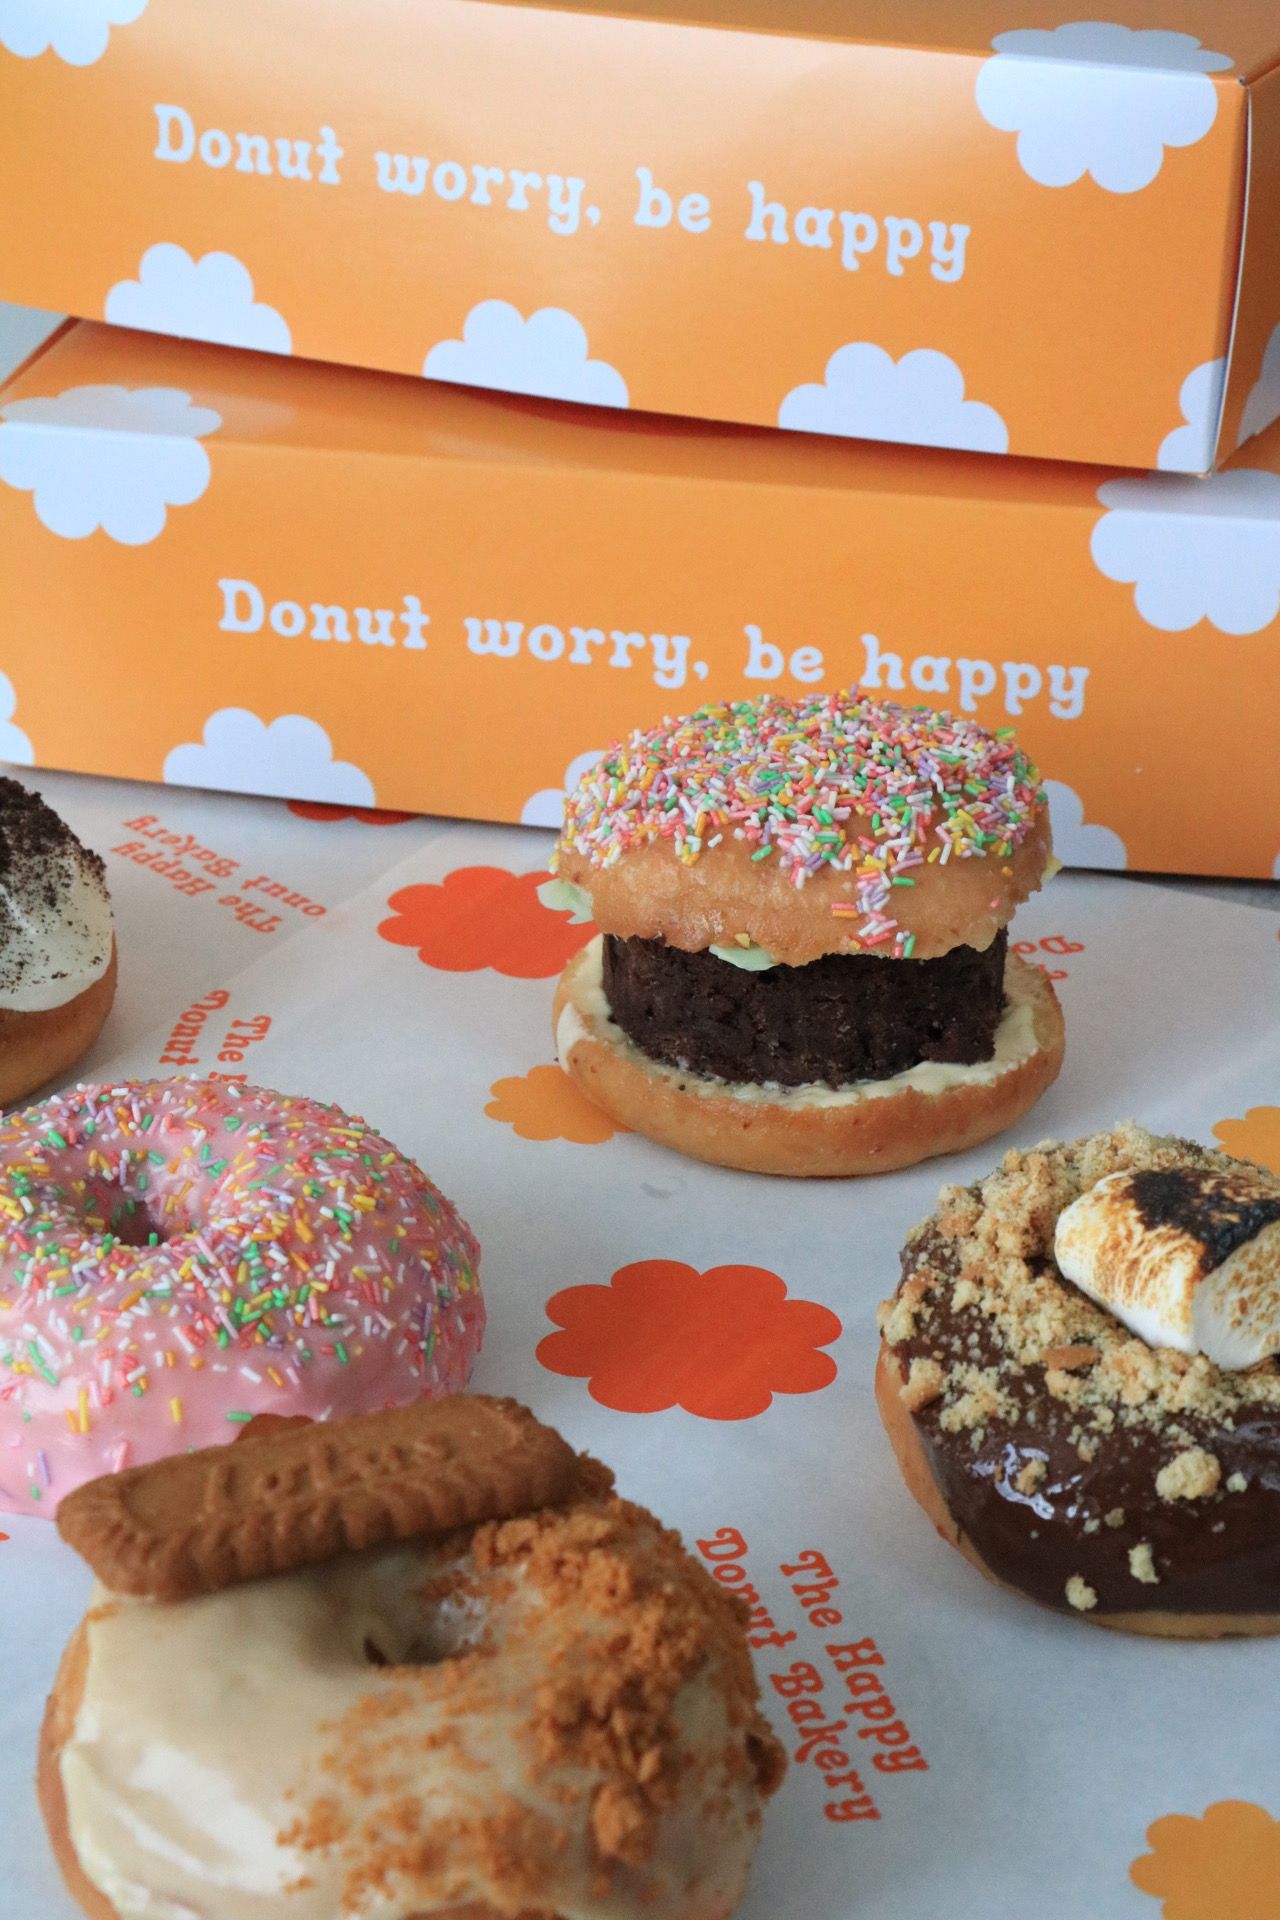 The Happy Donut Bakery: Vegan Goods Made Sweet So You Donut Need to Worry